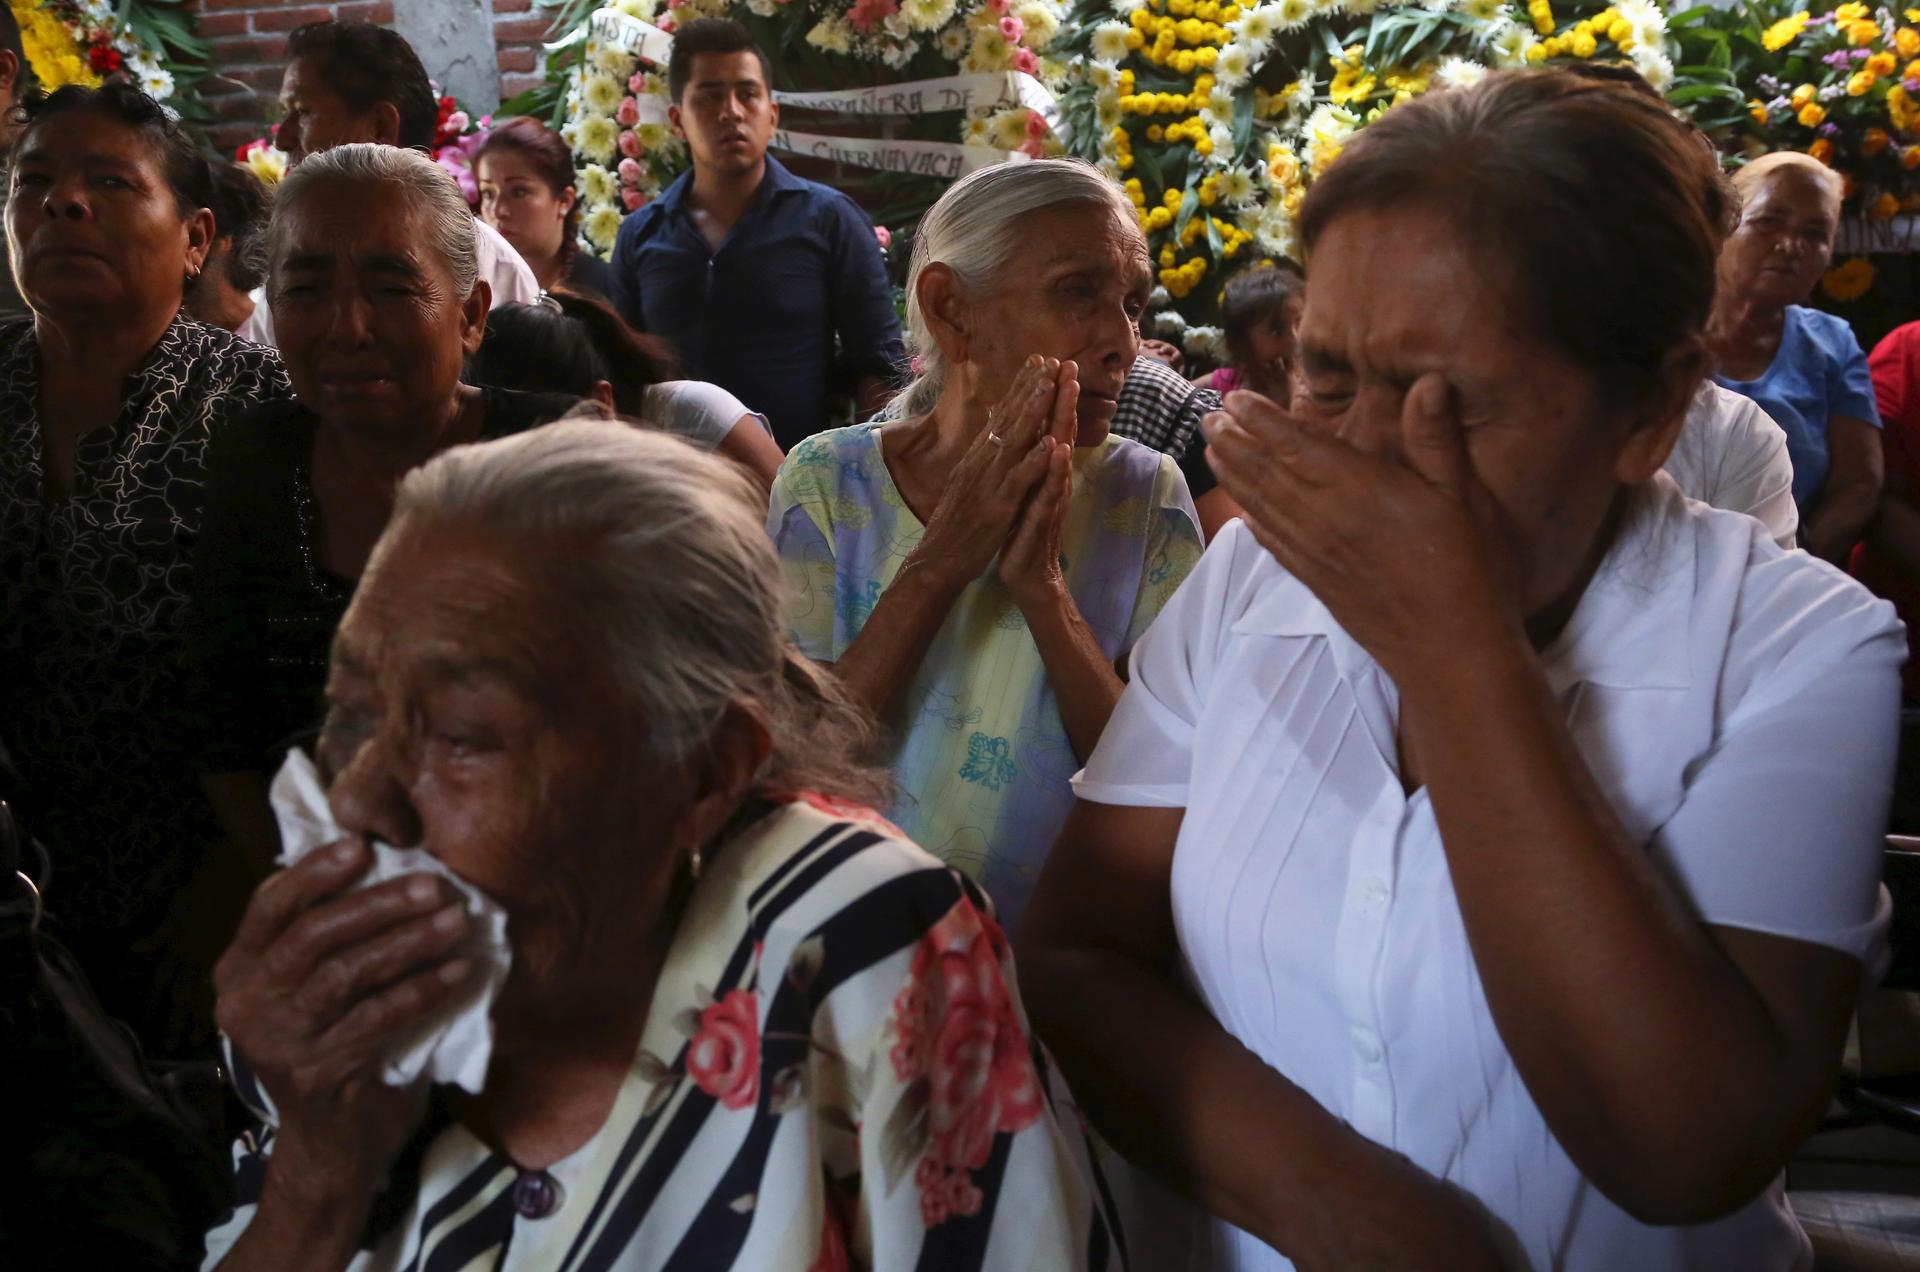 Residents react during the funeral of newly-installed Temixco mayor Gisela Mota in Temixco, south of Mexico City, after Mota was shot dead on Saturday by four armed gunmen, January 3, 2016.